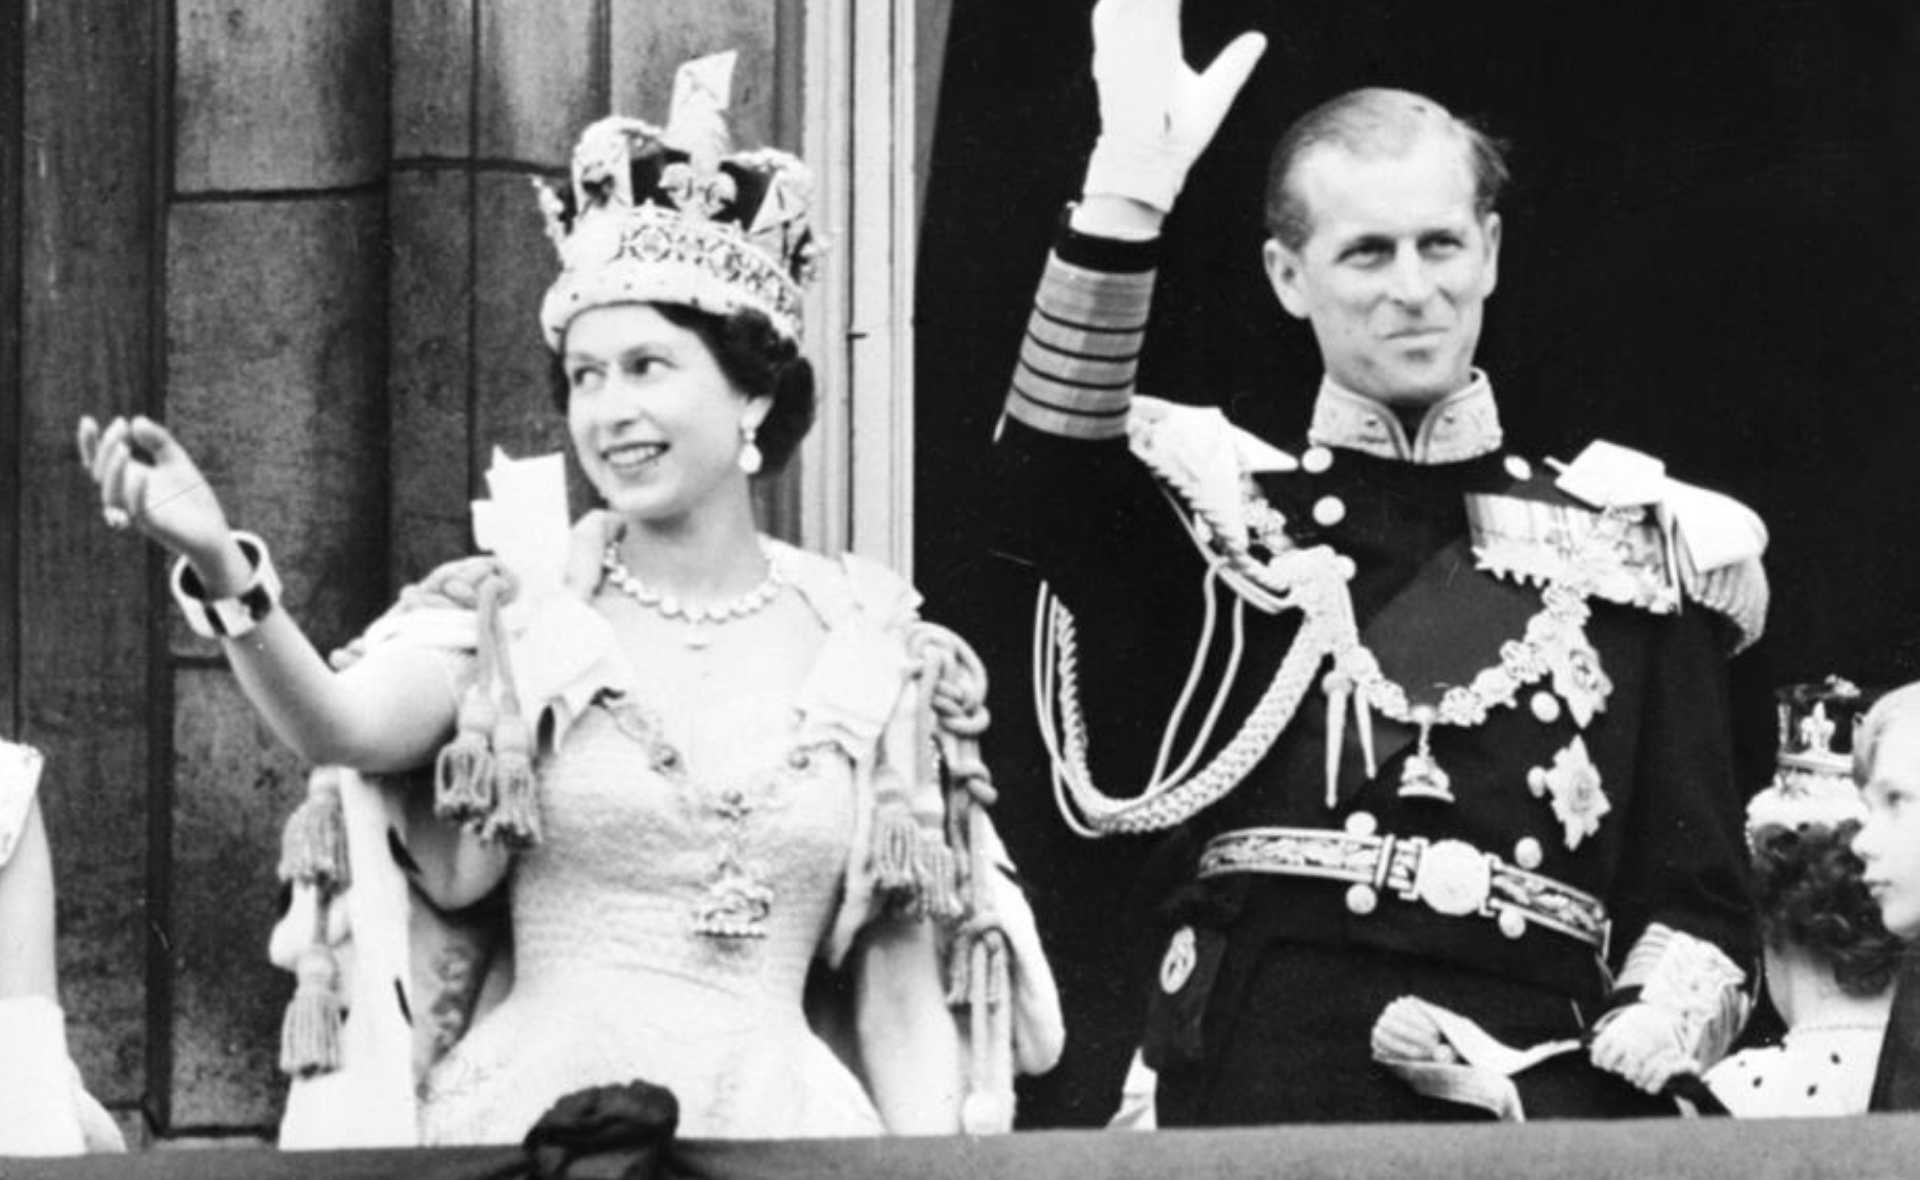 There’s compelling reason why The Queen won’t abdicate the throne despite the passing of Prince Philip